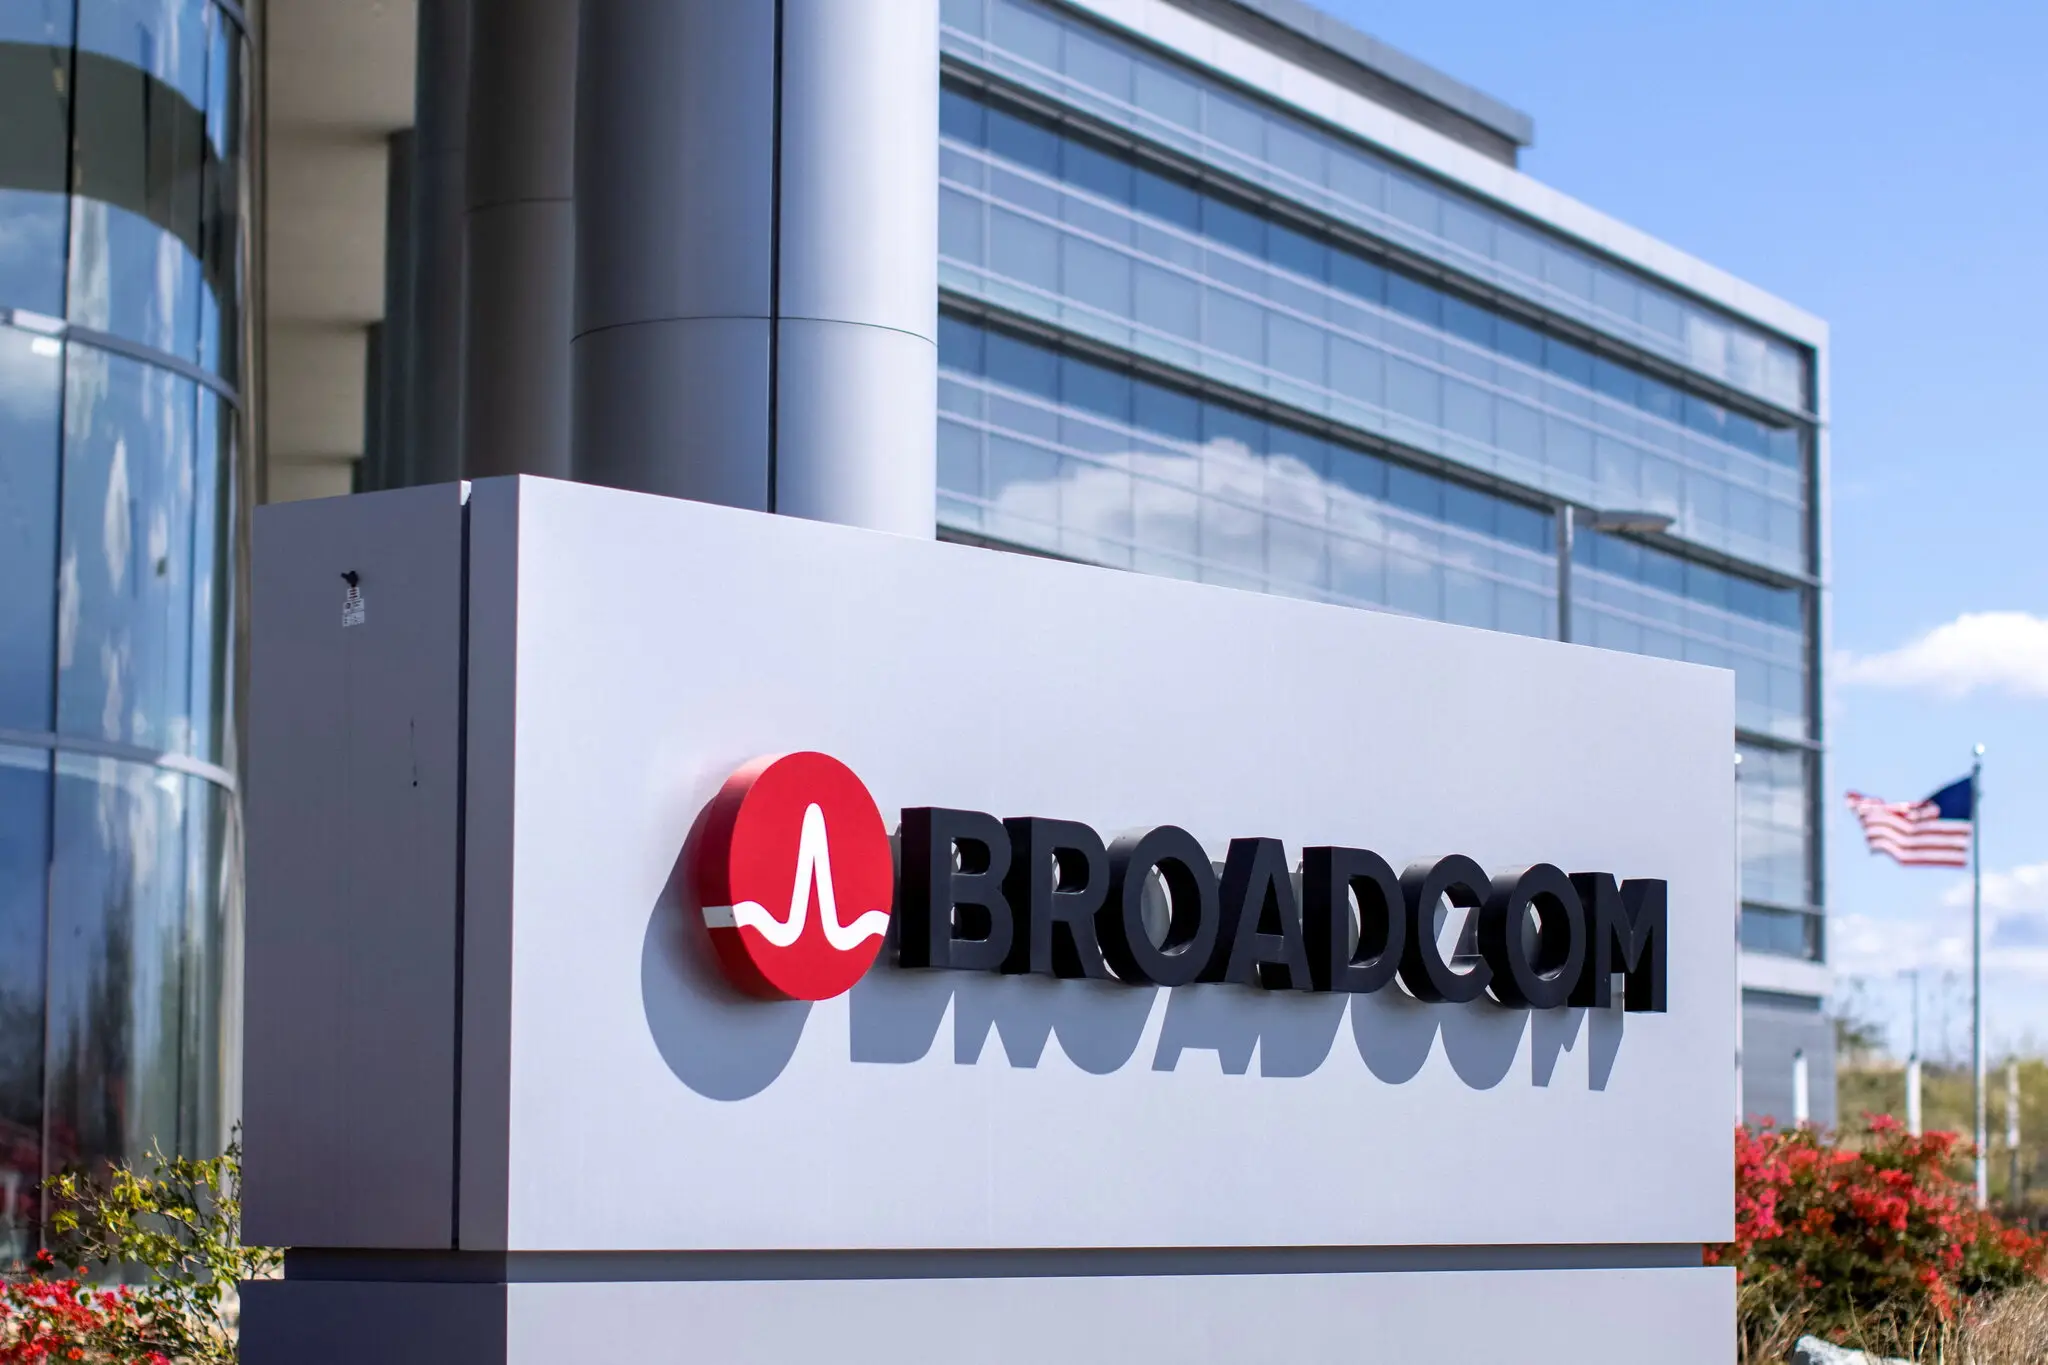 Who are Broadcom's joint venture partners?